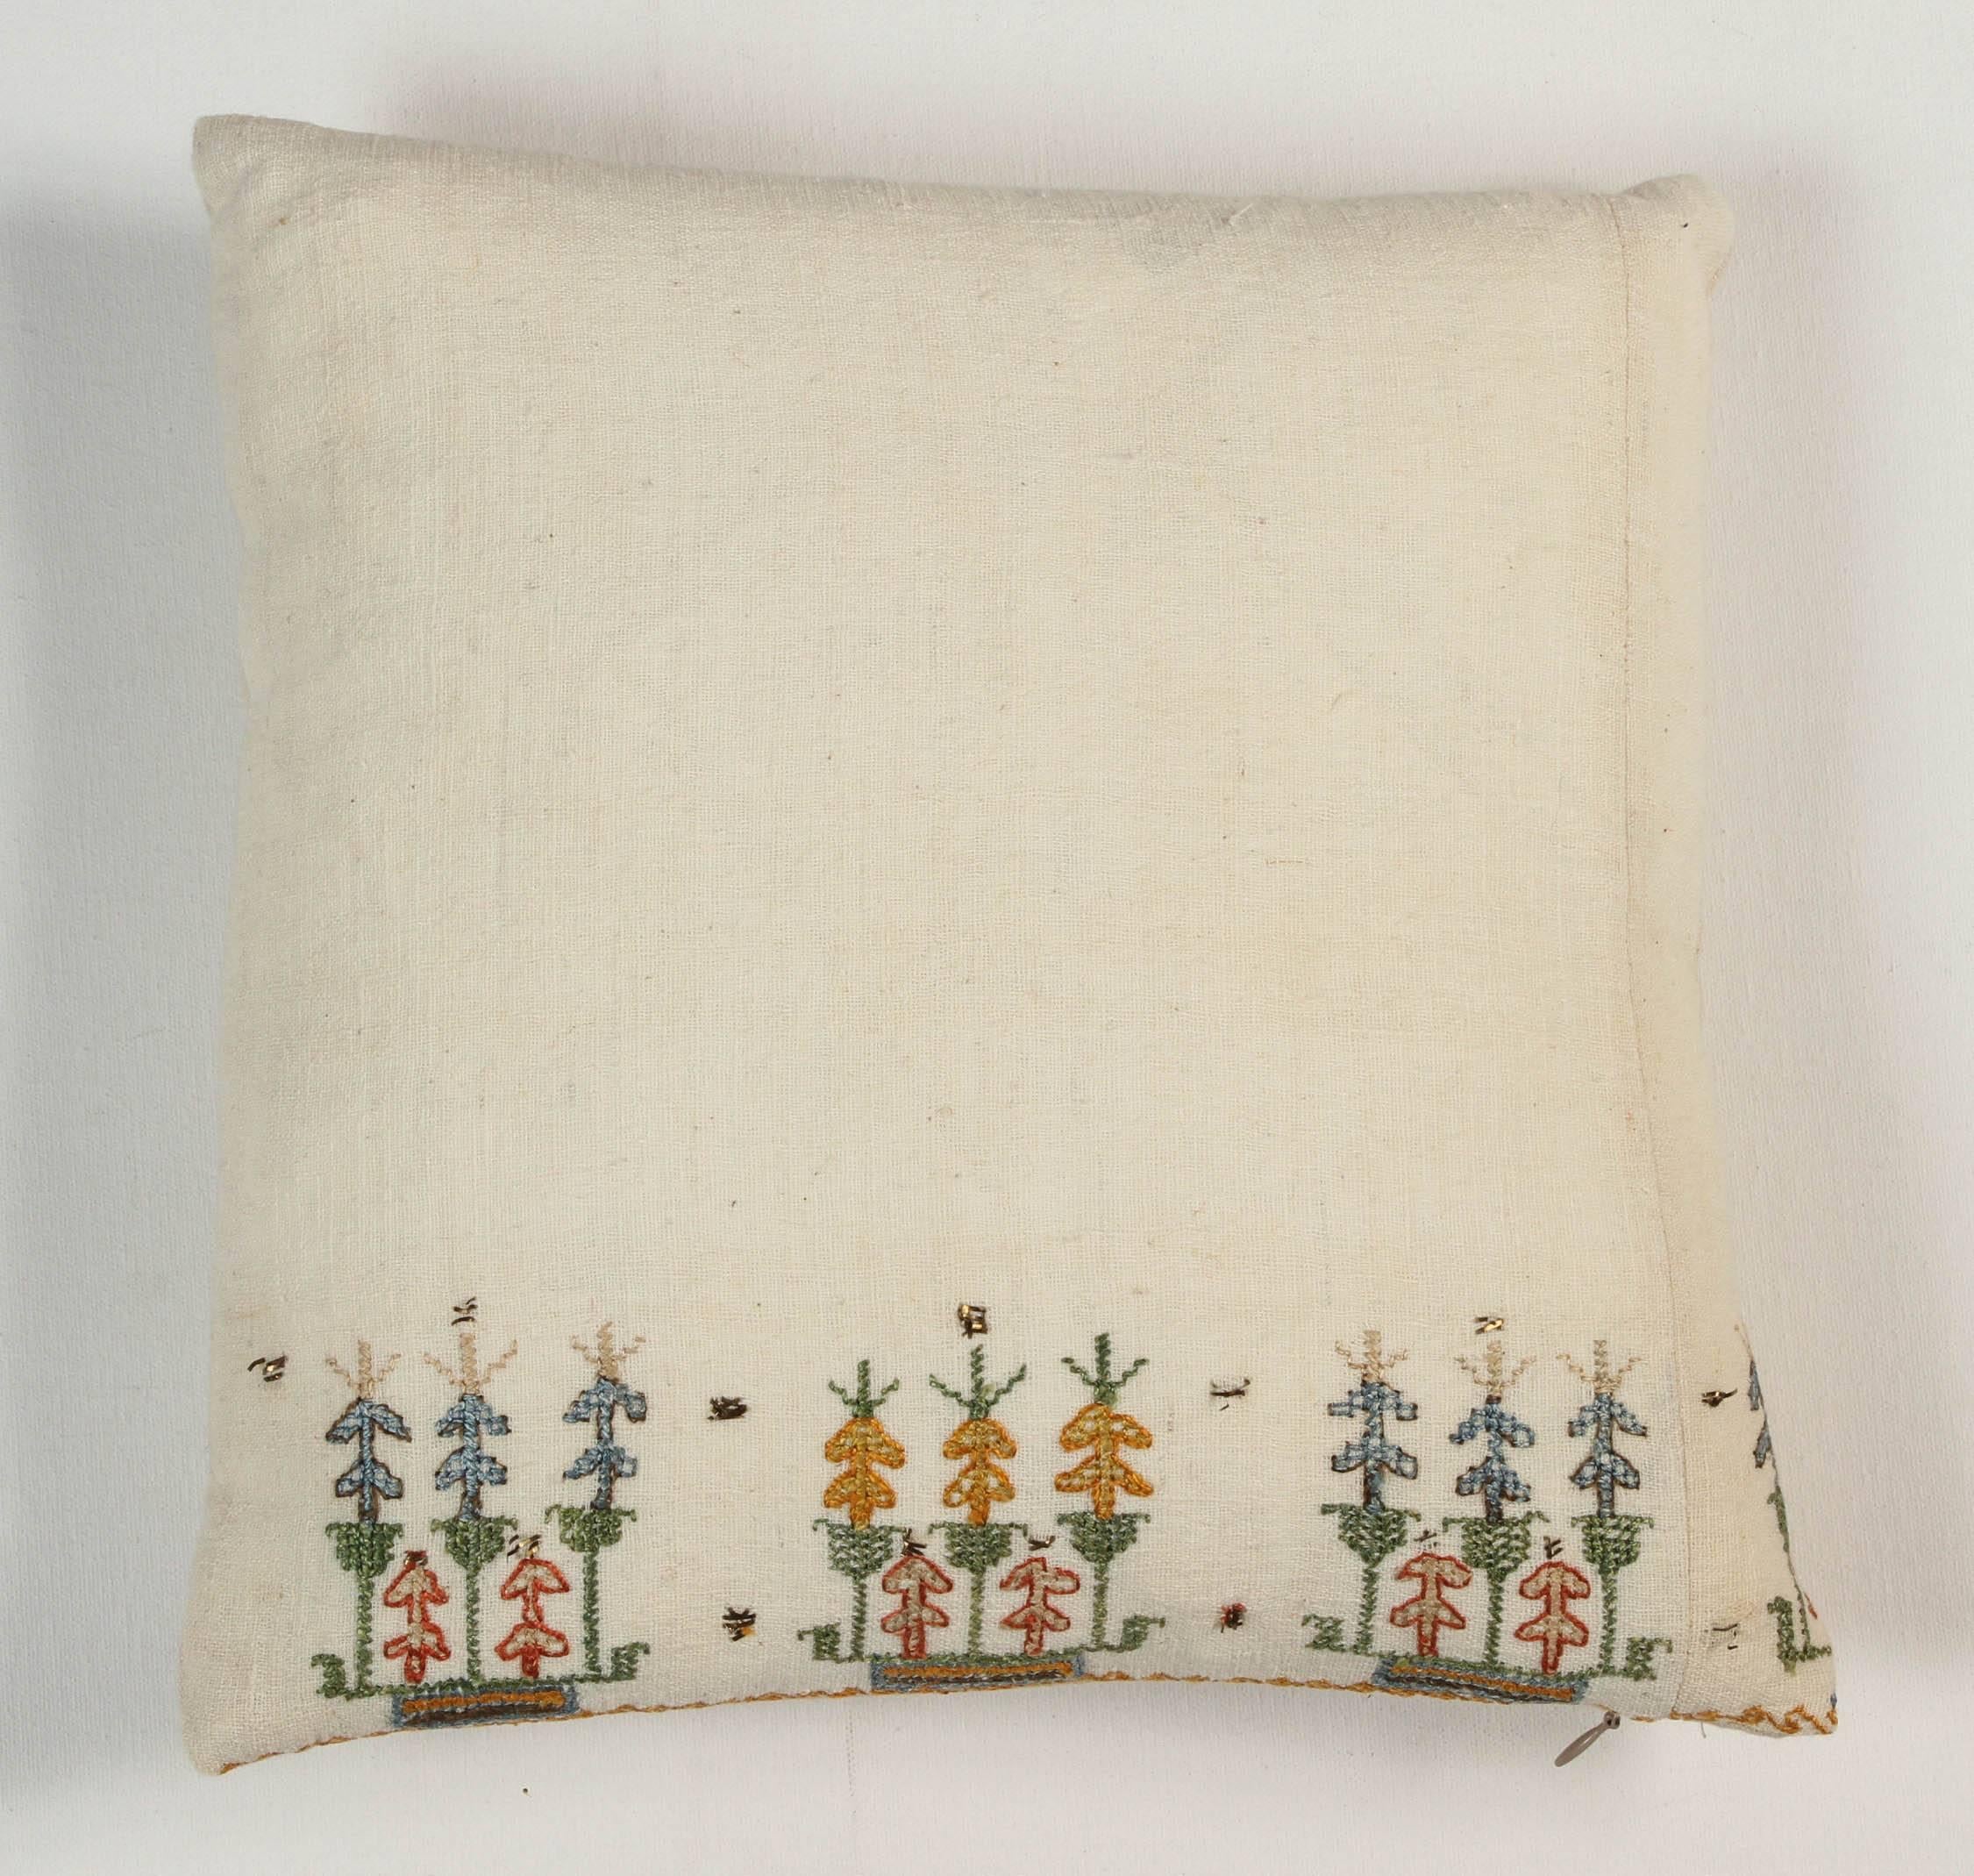 Pat McGann Workshop
Antique Turkish embroidered, handwoven linen textile pillow. Fine cotton floss embroidery. Off-white linen back with zipper and feather and down fill.